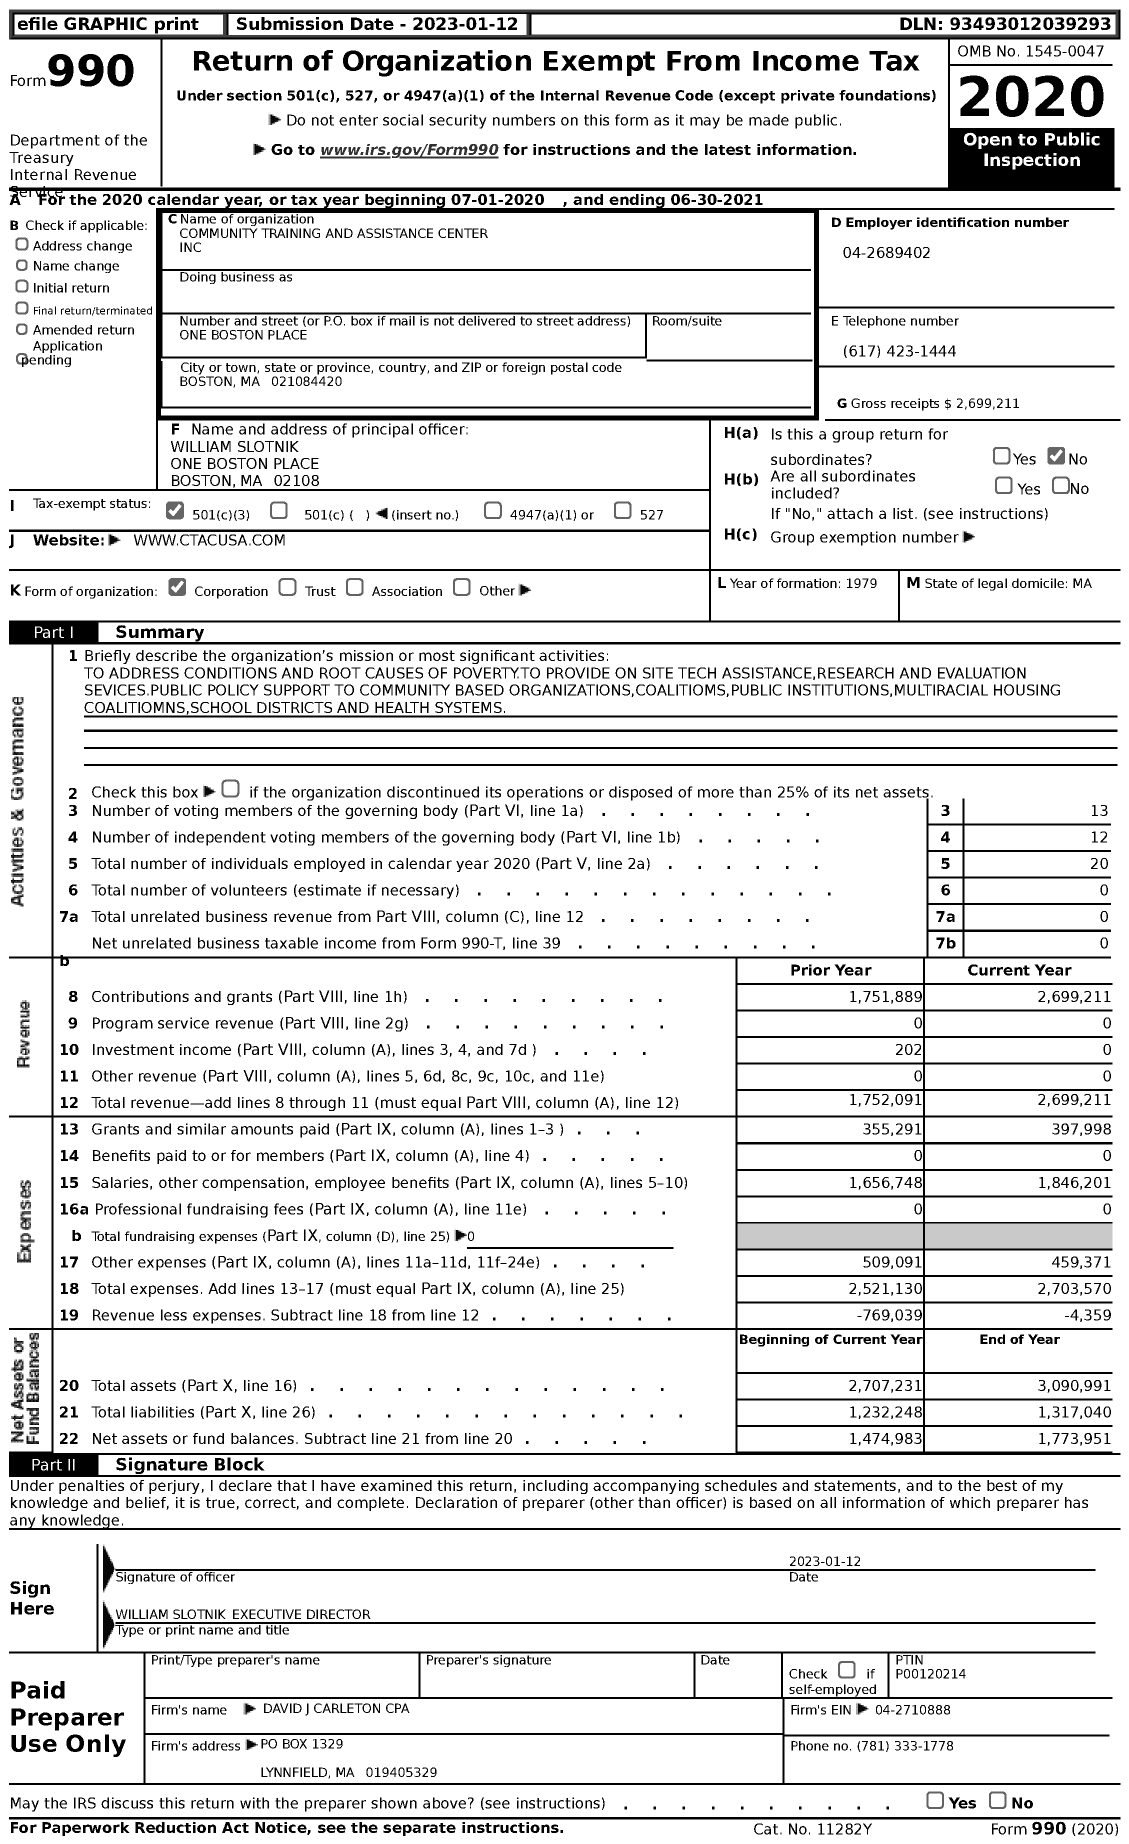 Image of first page of 2020 Form 990 for Community Training and Assistance Center